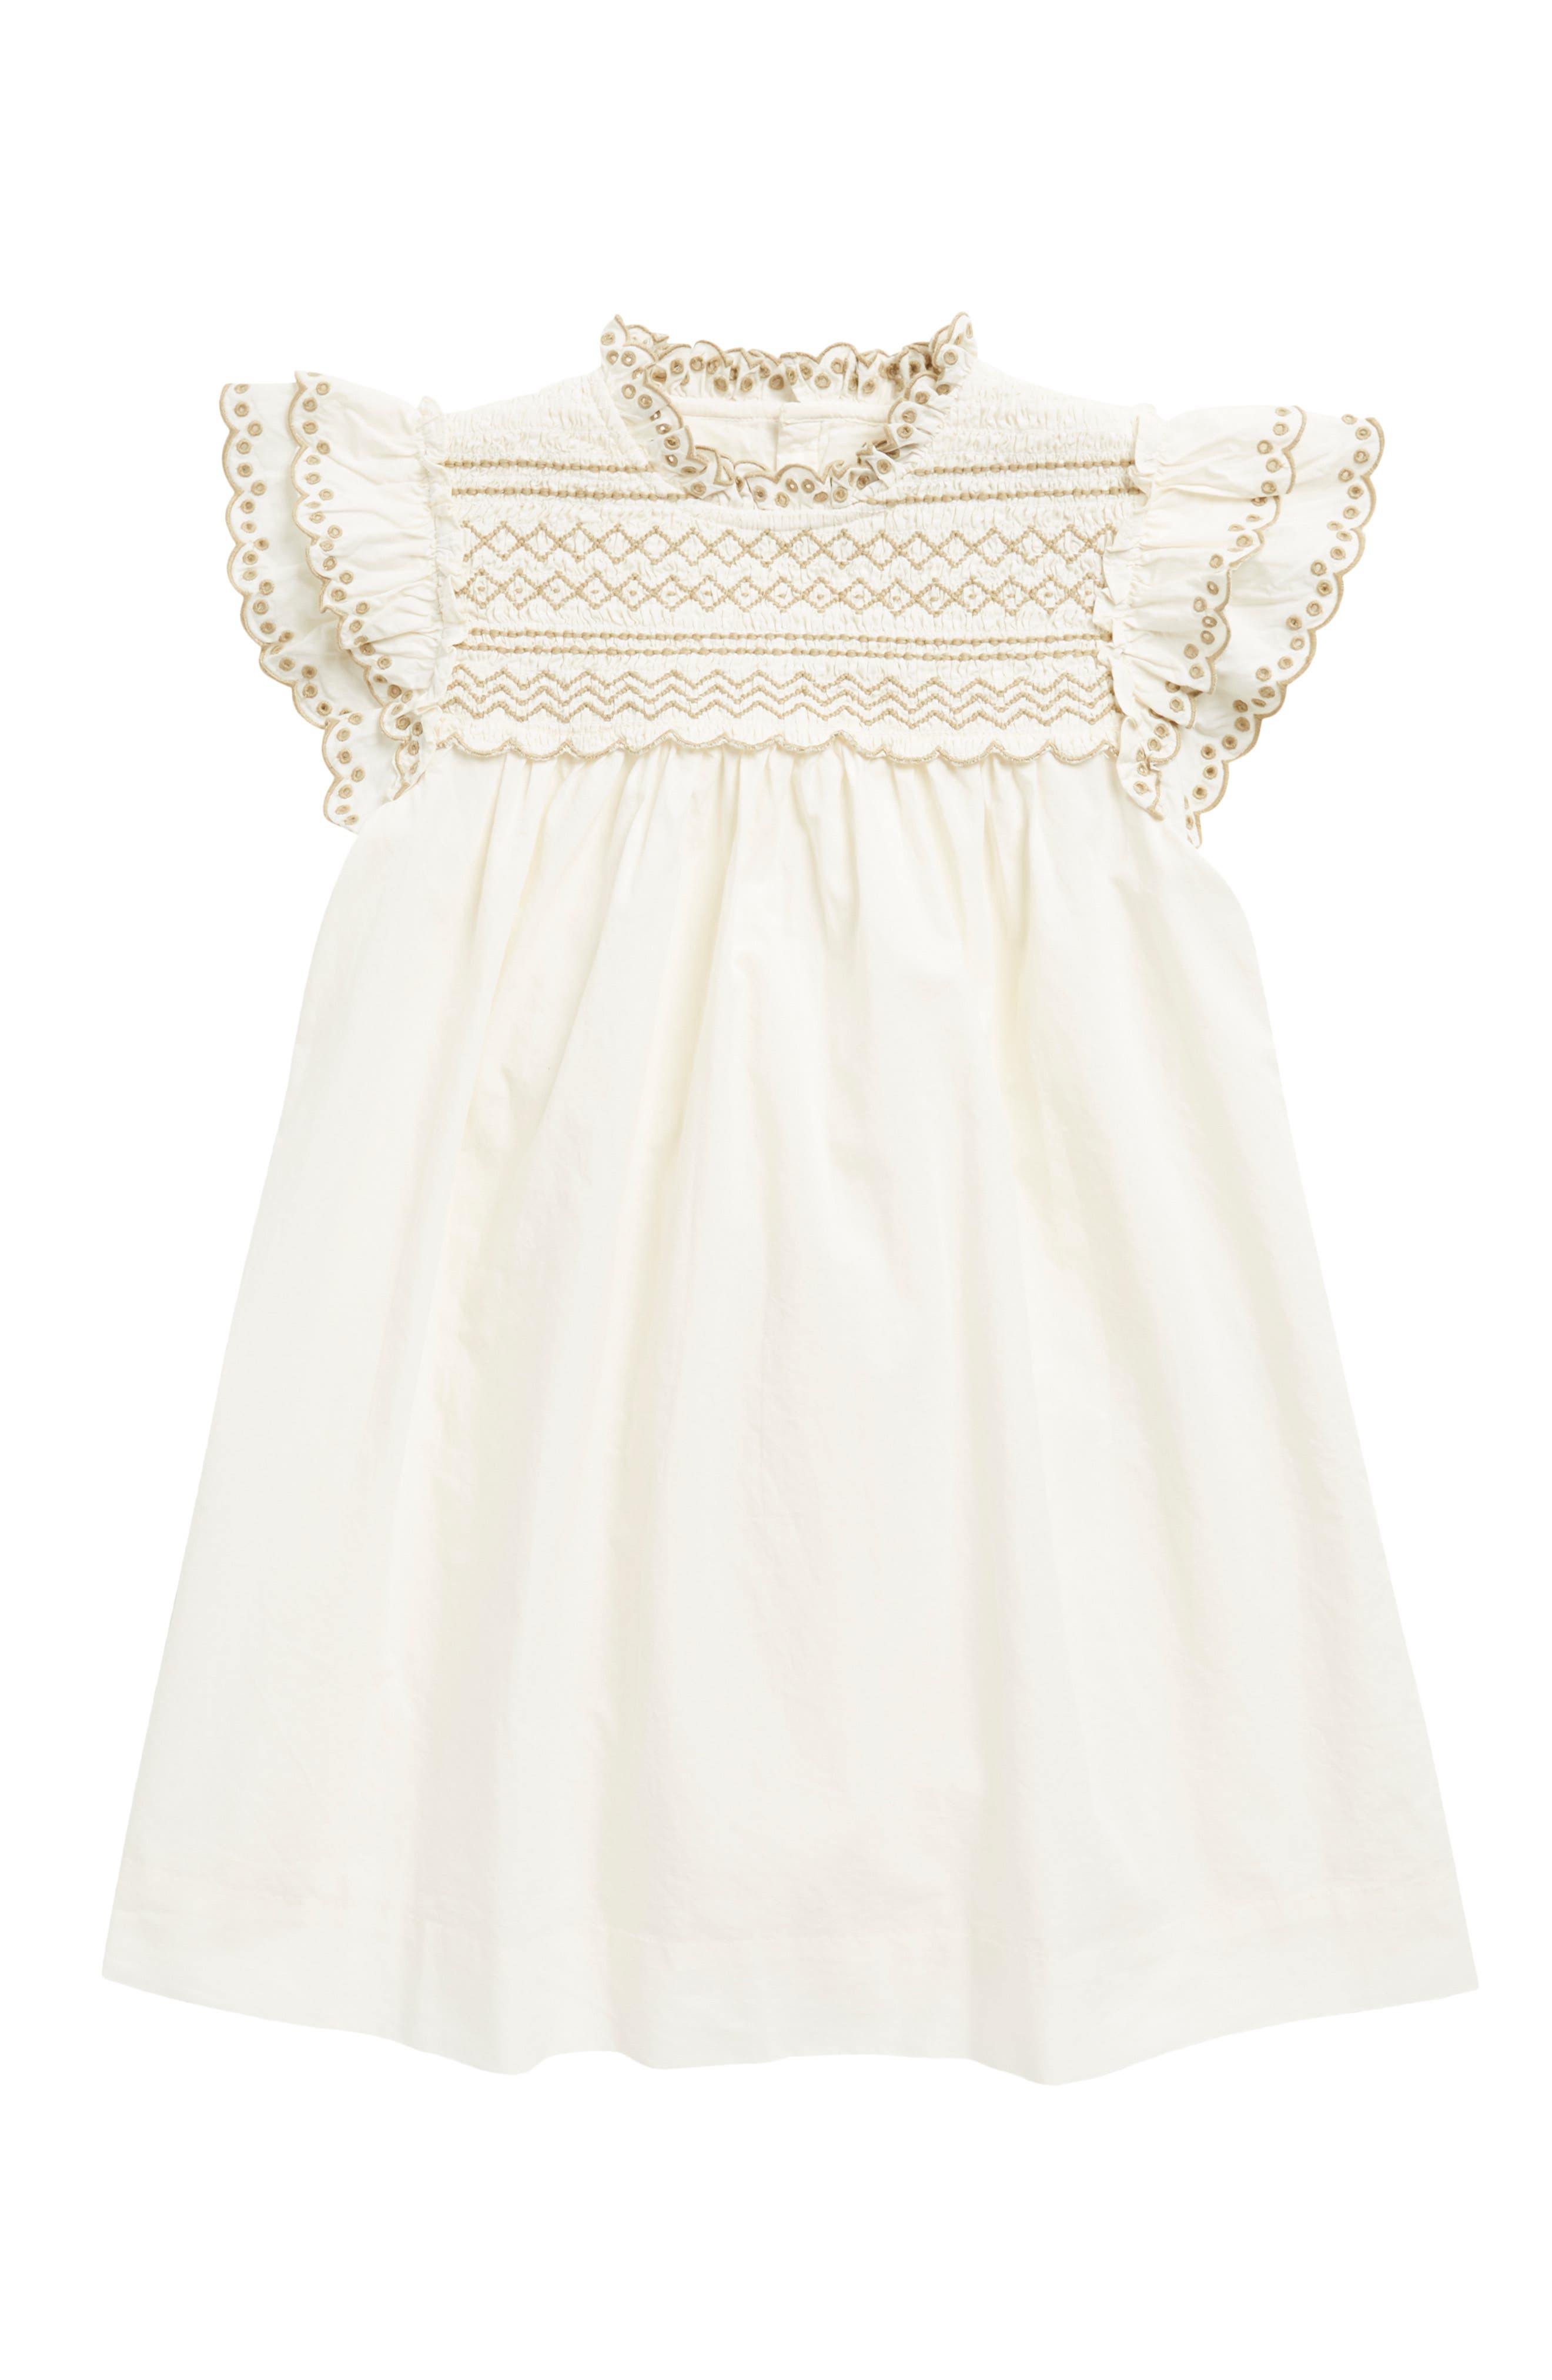 Age 12 Bonpoint Girl’s ‘Bonpoint’ Hand Embroidered Sleeveless White Lined  Summer Dress 